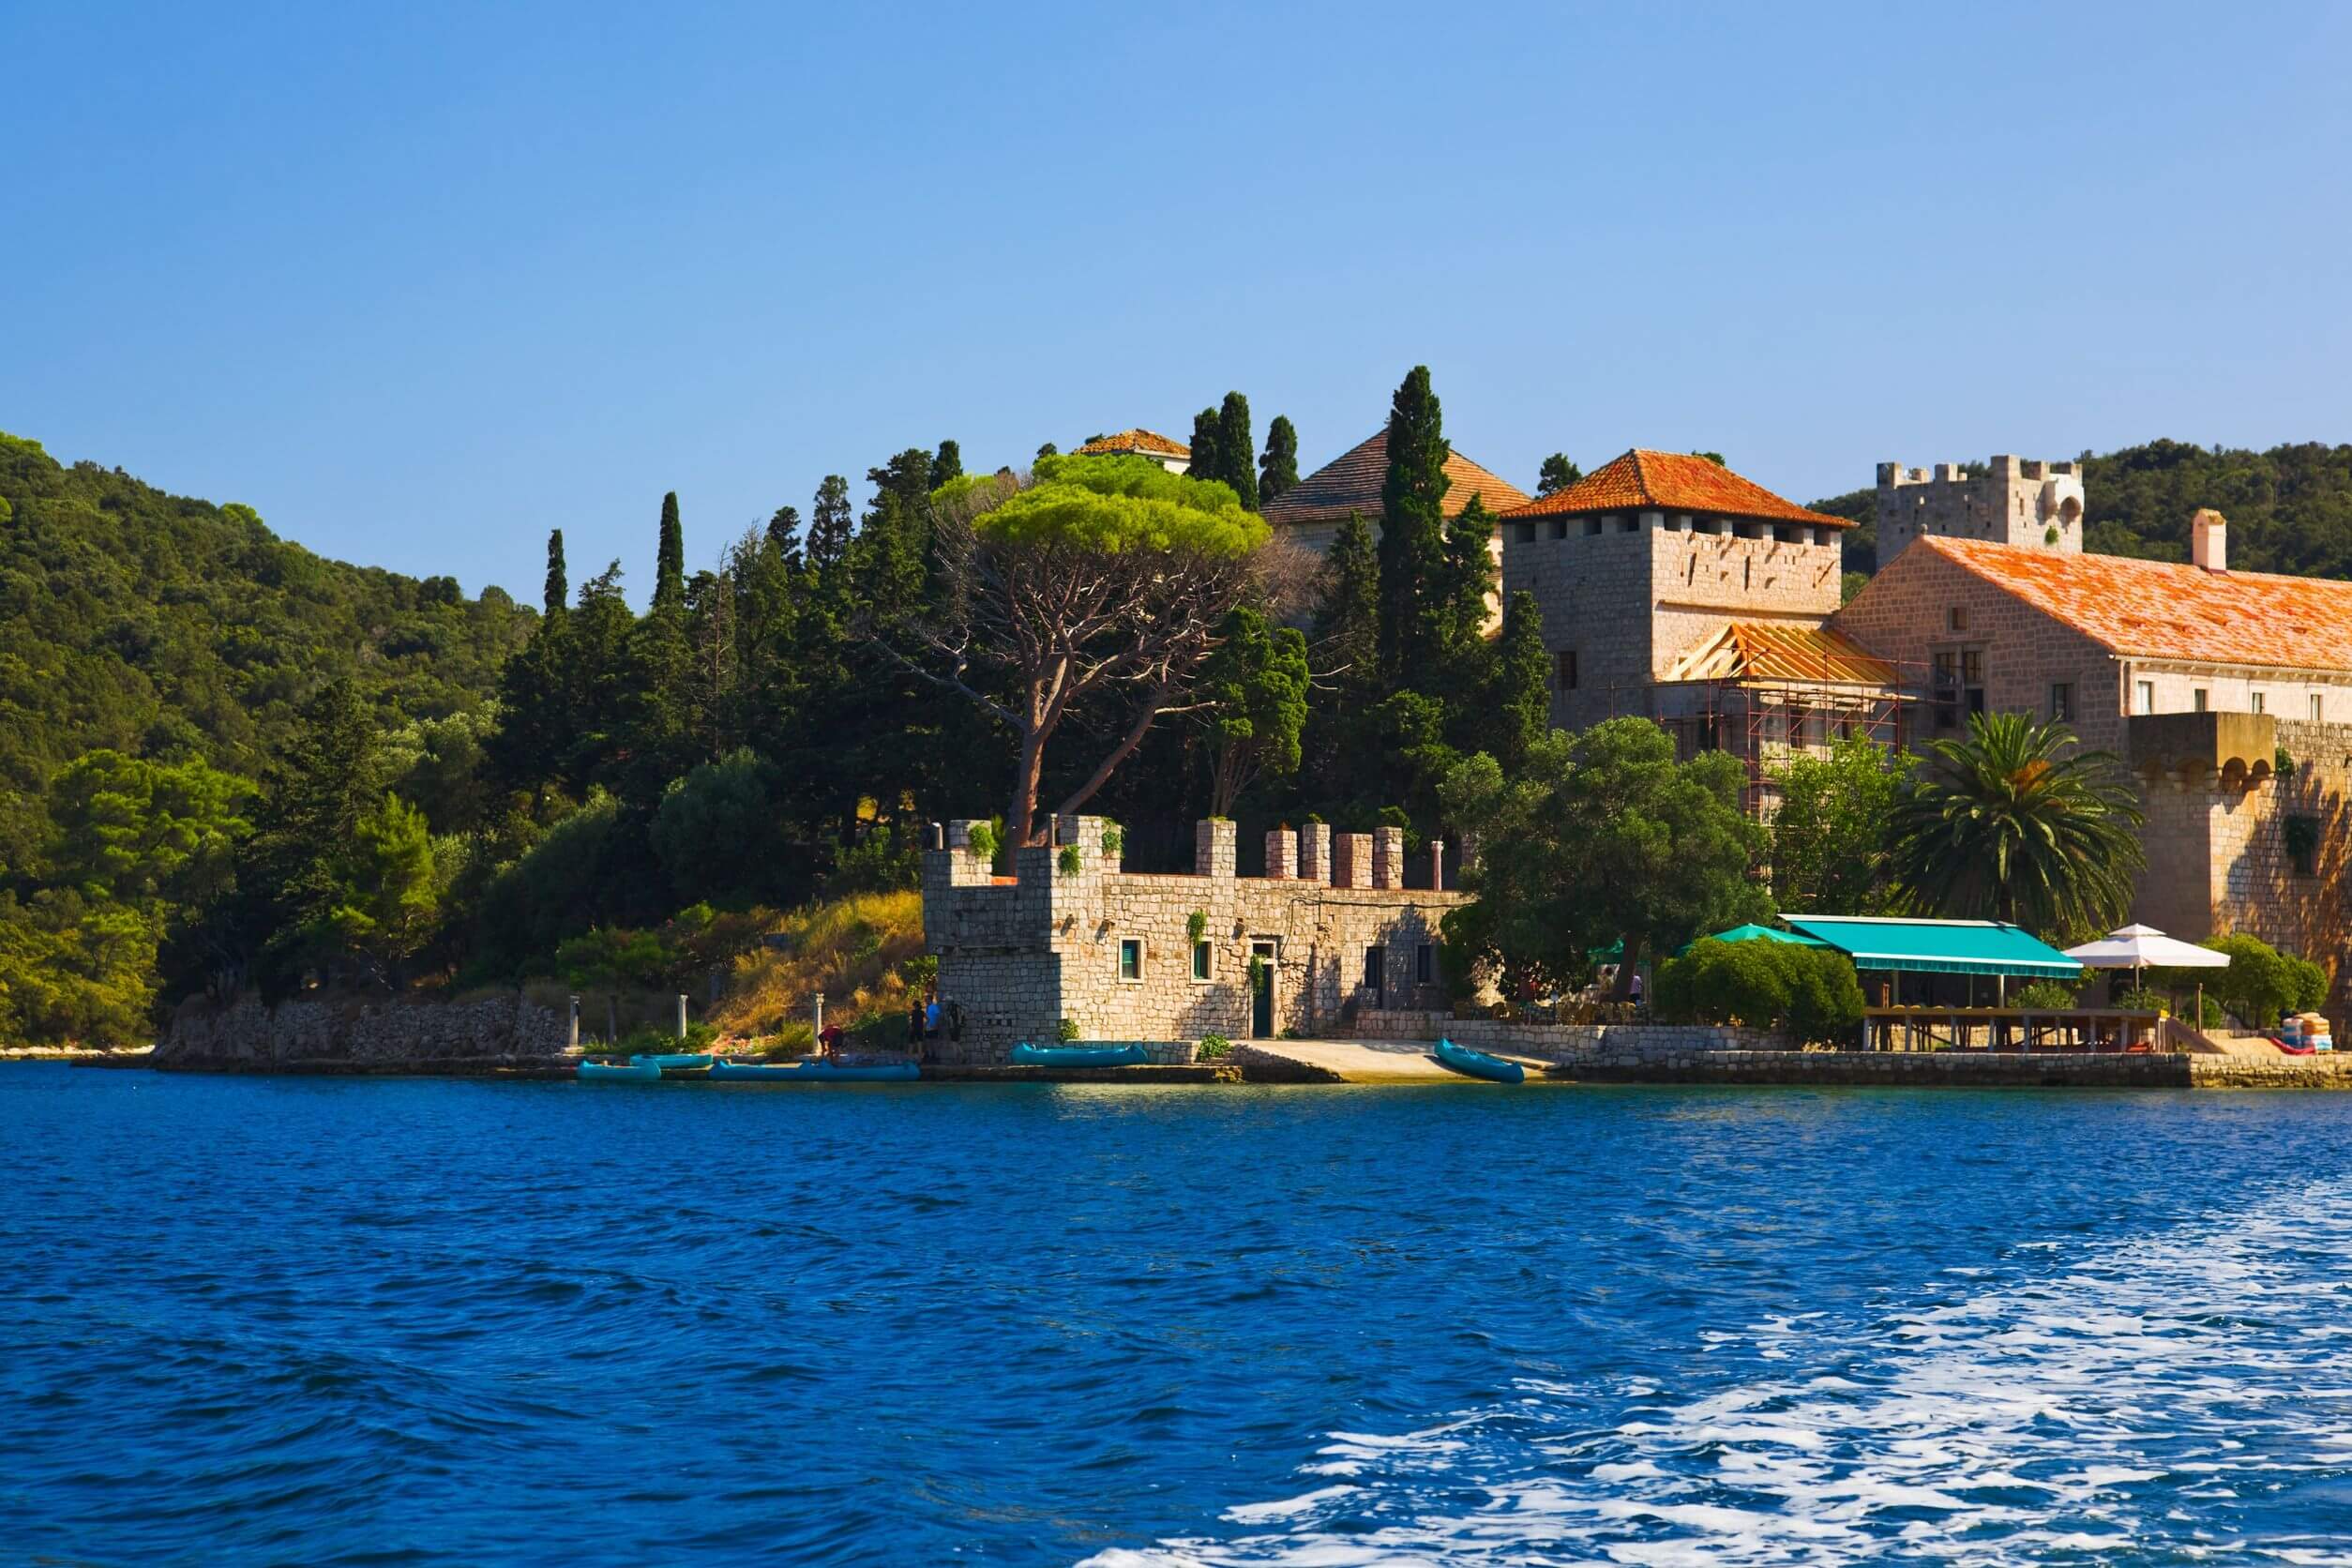 1-Day Island of Mljet Boat Tour from Dubrovnik